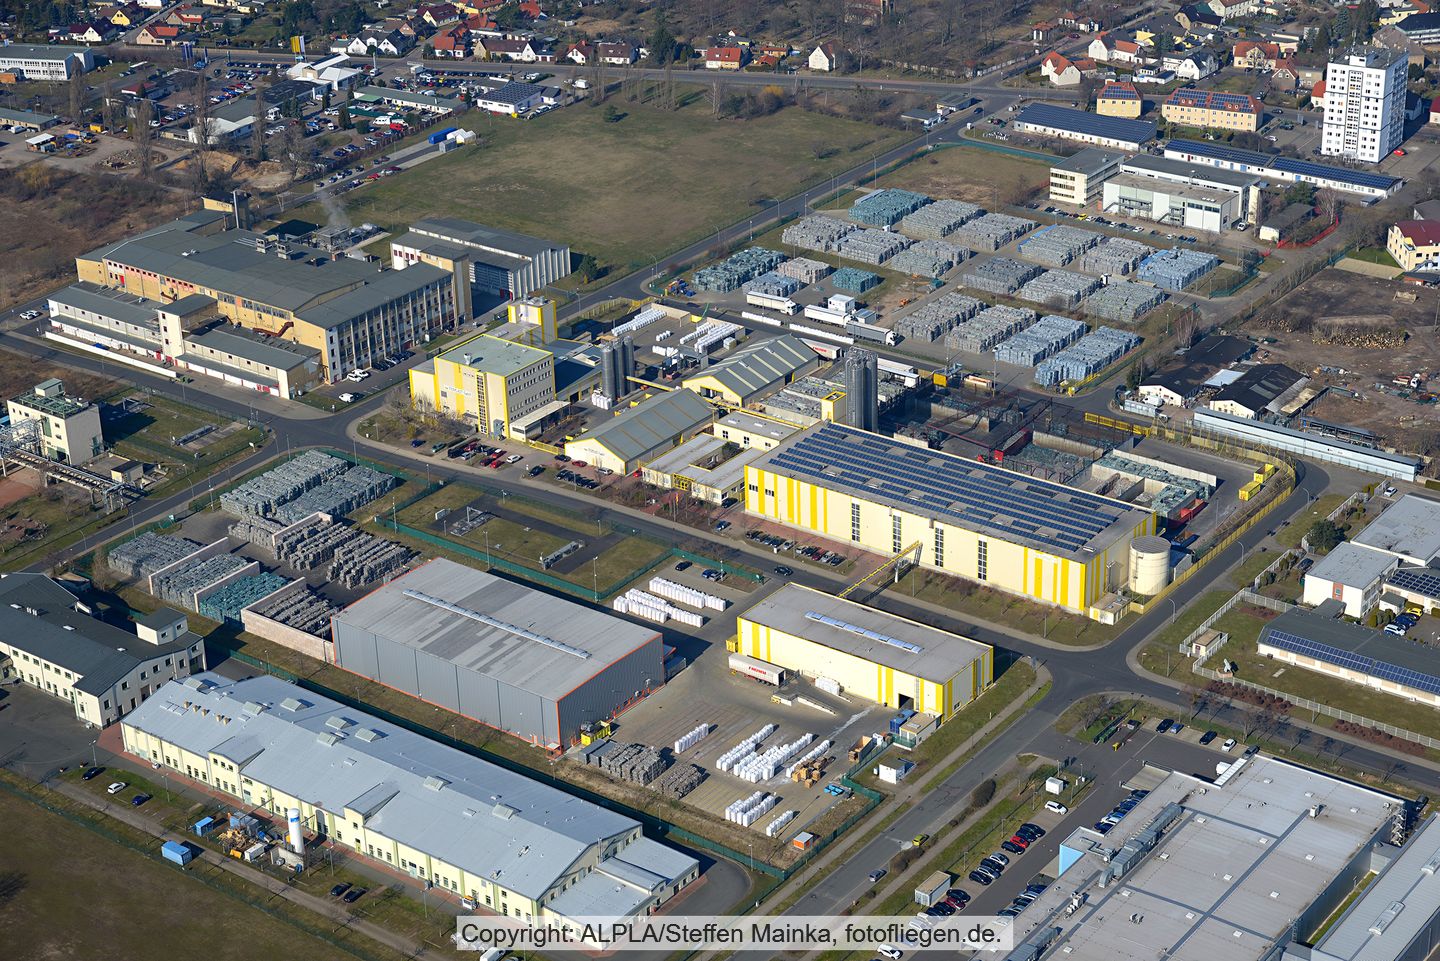 Aerial view of Texplast's site in Wolfen, Germany